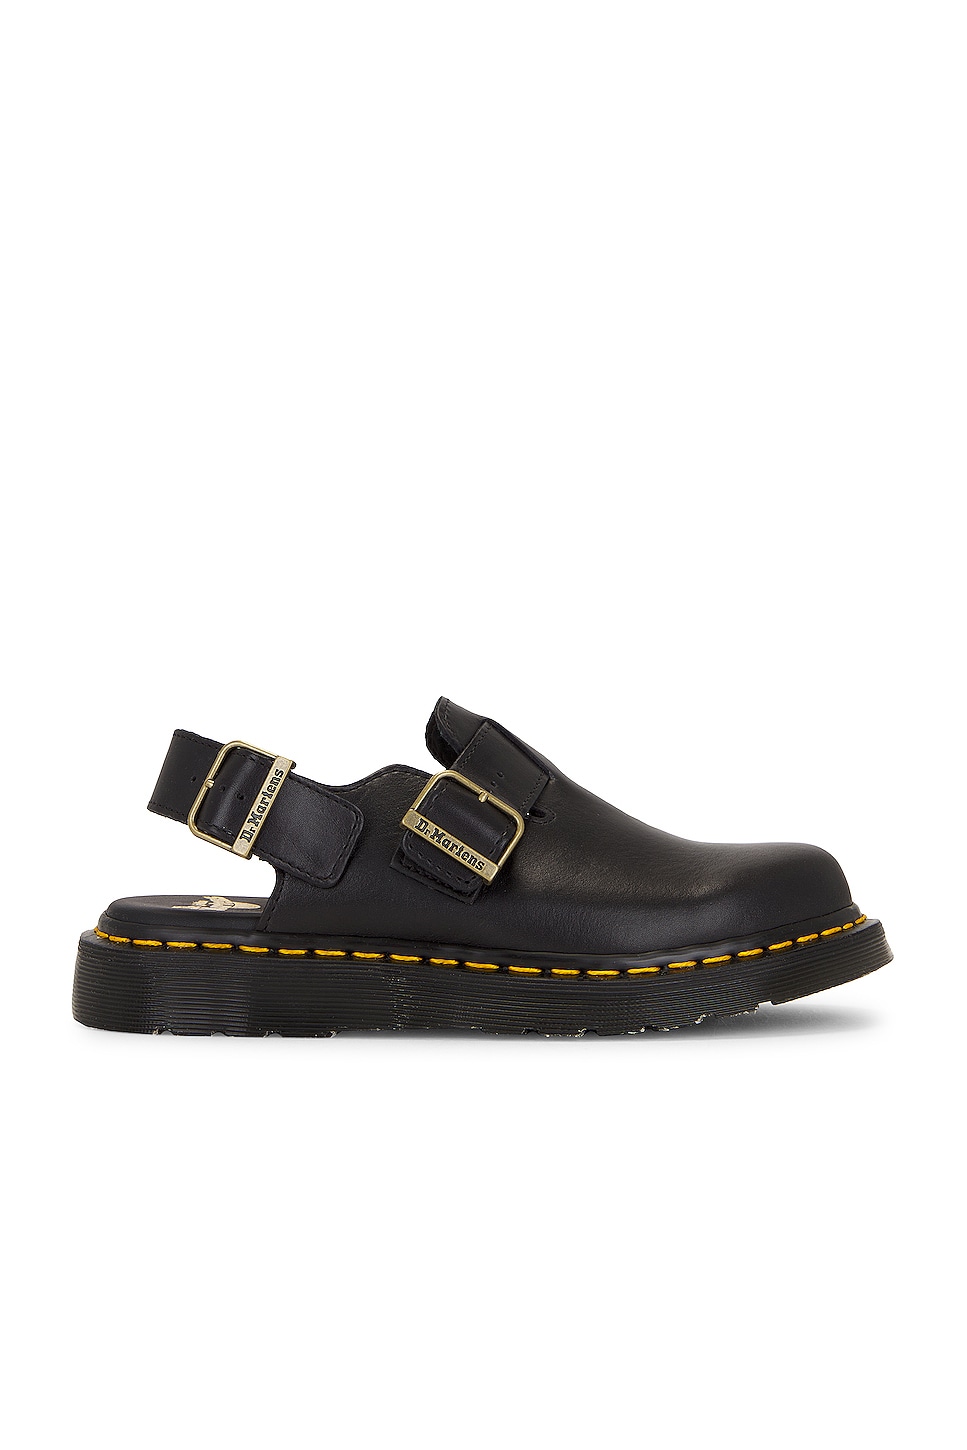 Image 1 of Dr. Martens Jorge Classic Calf in Black